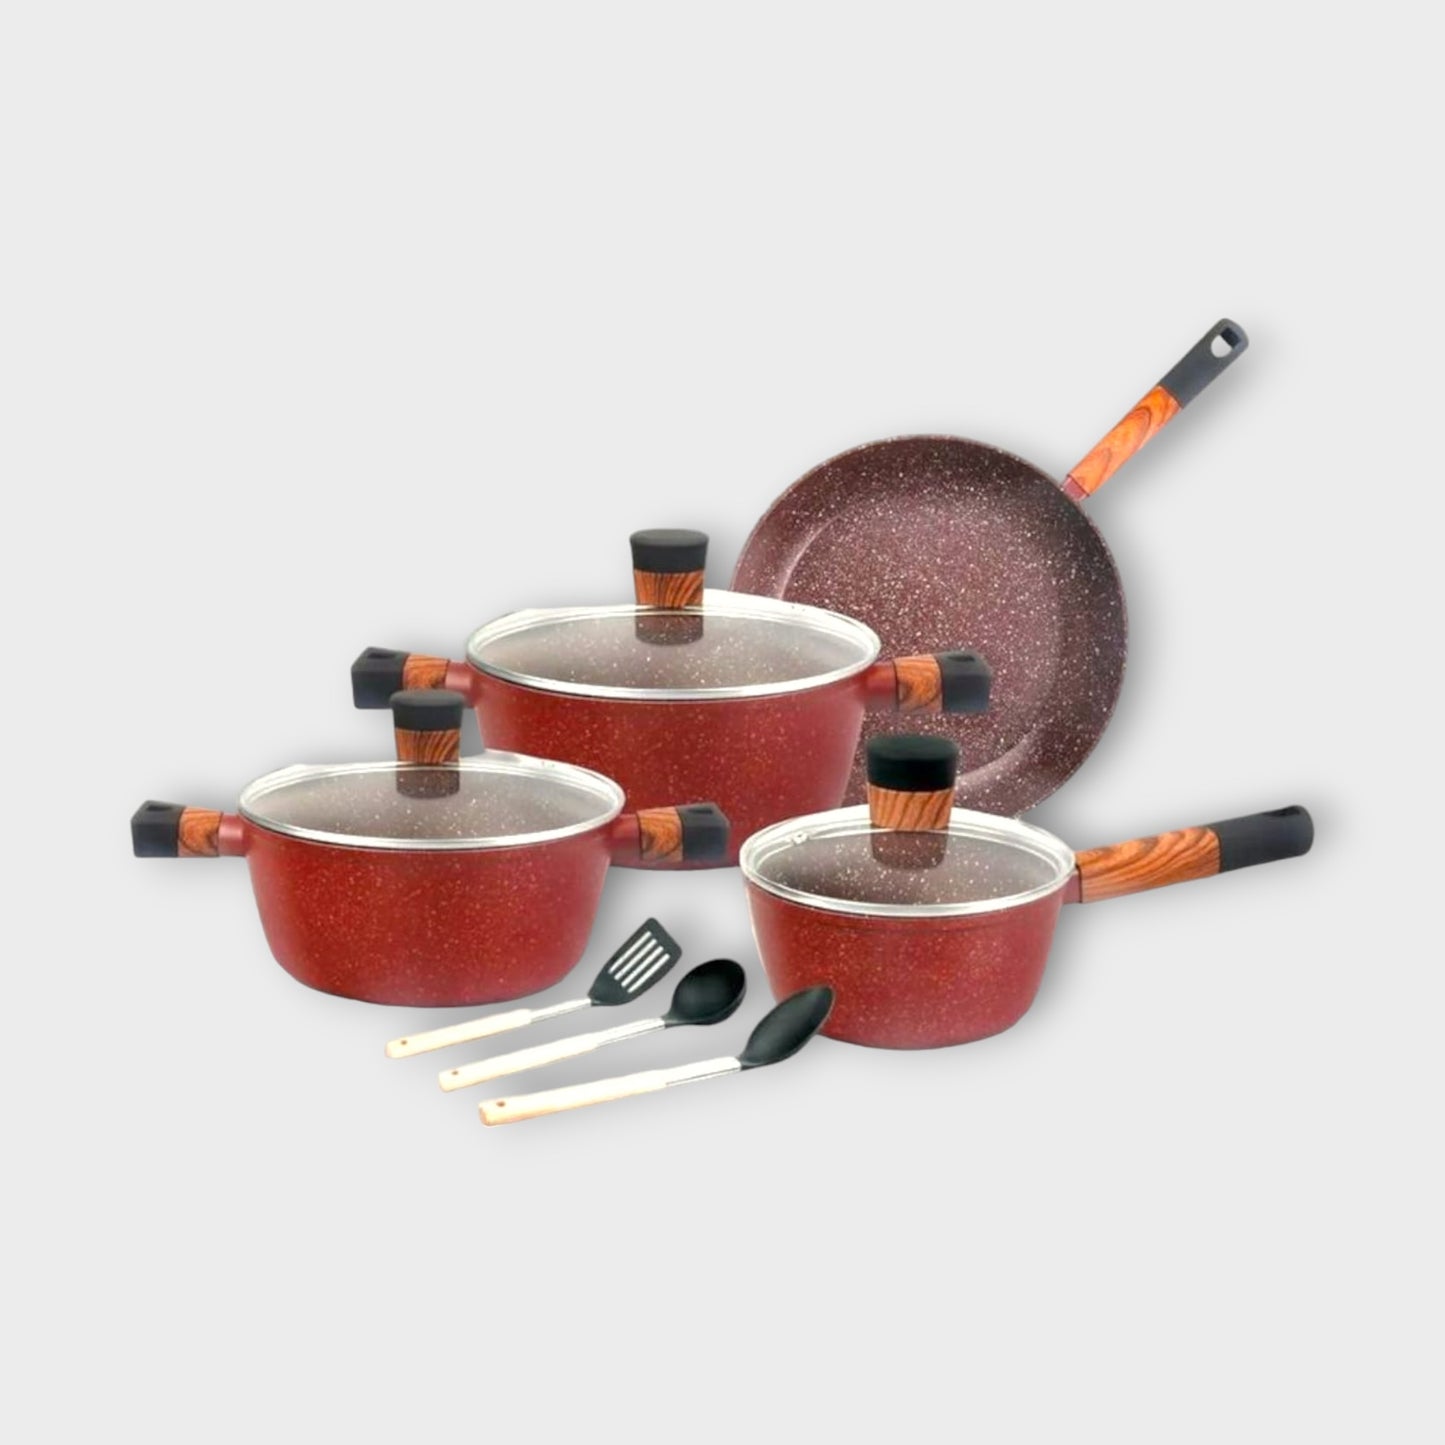 10-Piece Aluminum Cookware Set with Granite Coating. Durable & Non-Stick for Easy Cooking 